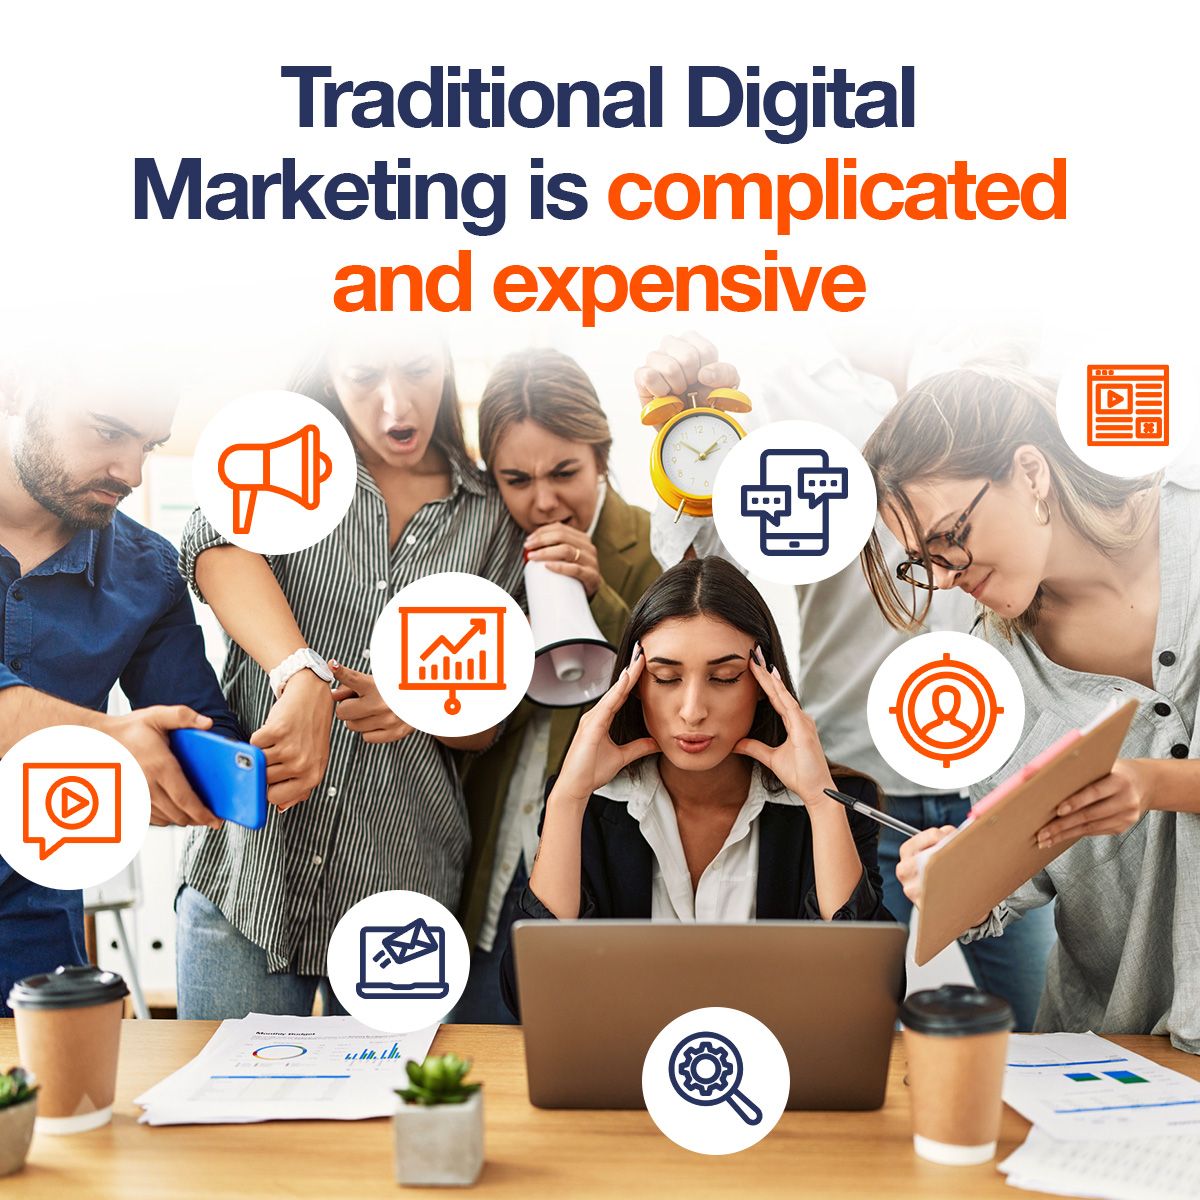 Traditional Digital Marketing is complicated and expensive